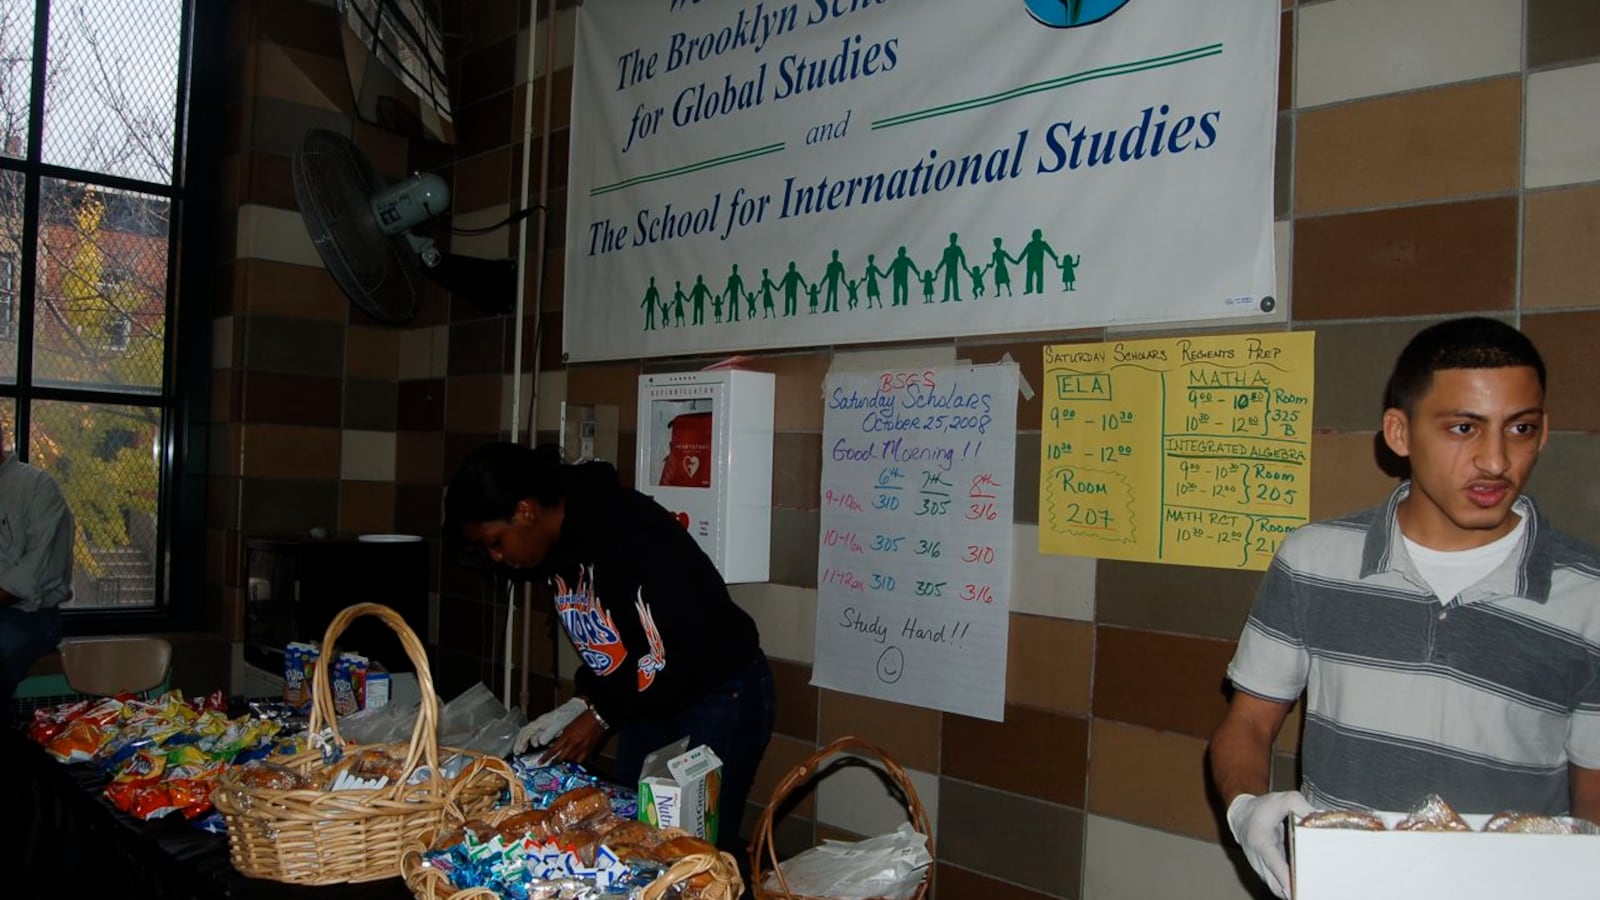 Students manned the bake sale at the Brooklyn School for International Studies.